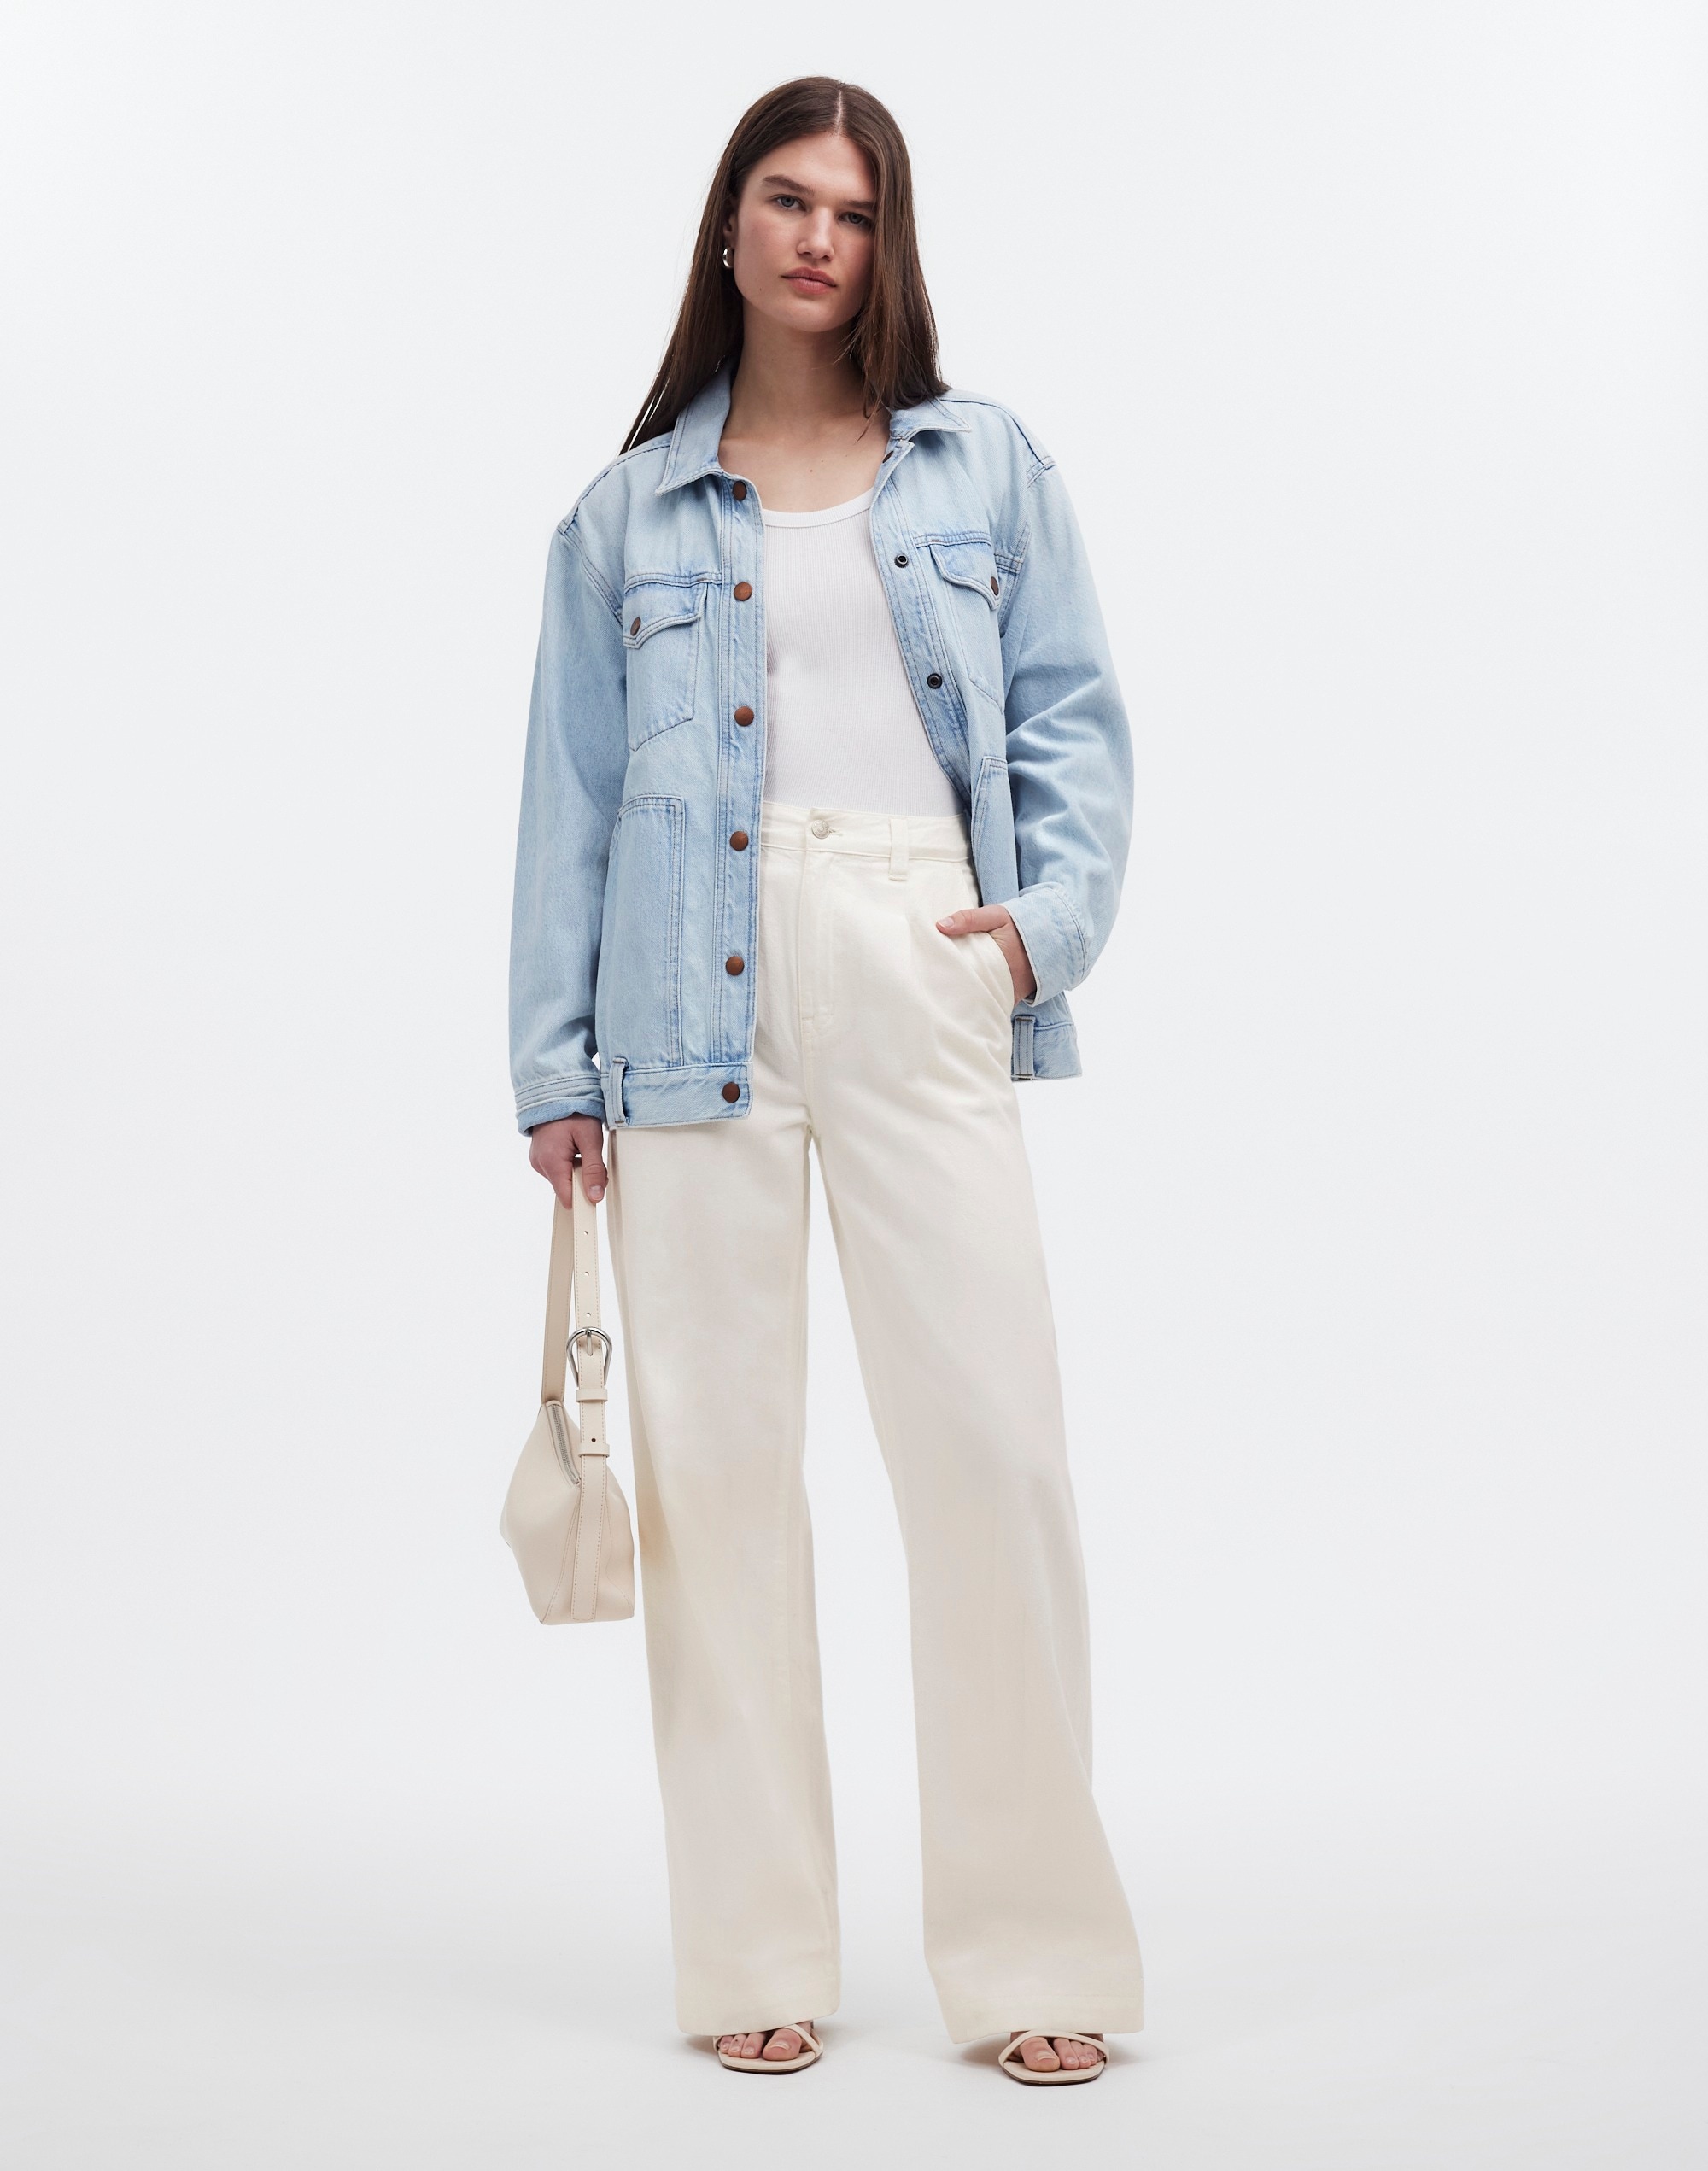 The Harlow Wide-Leg Jean: Airy Denim Edition | Madewell